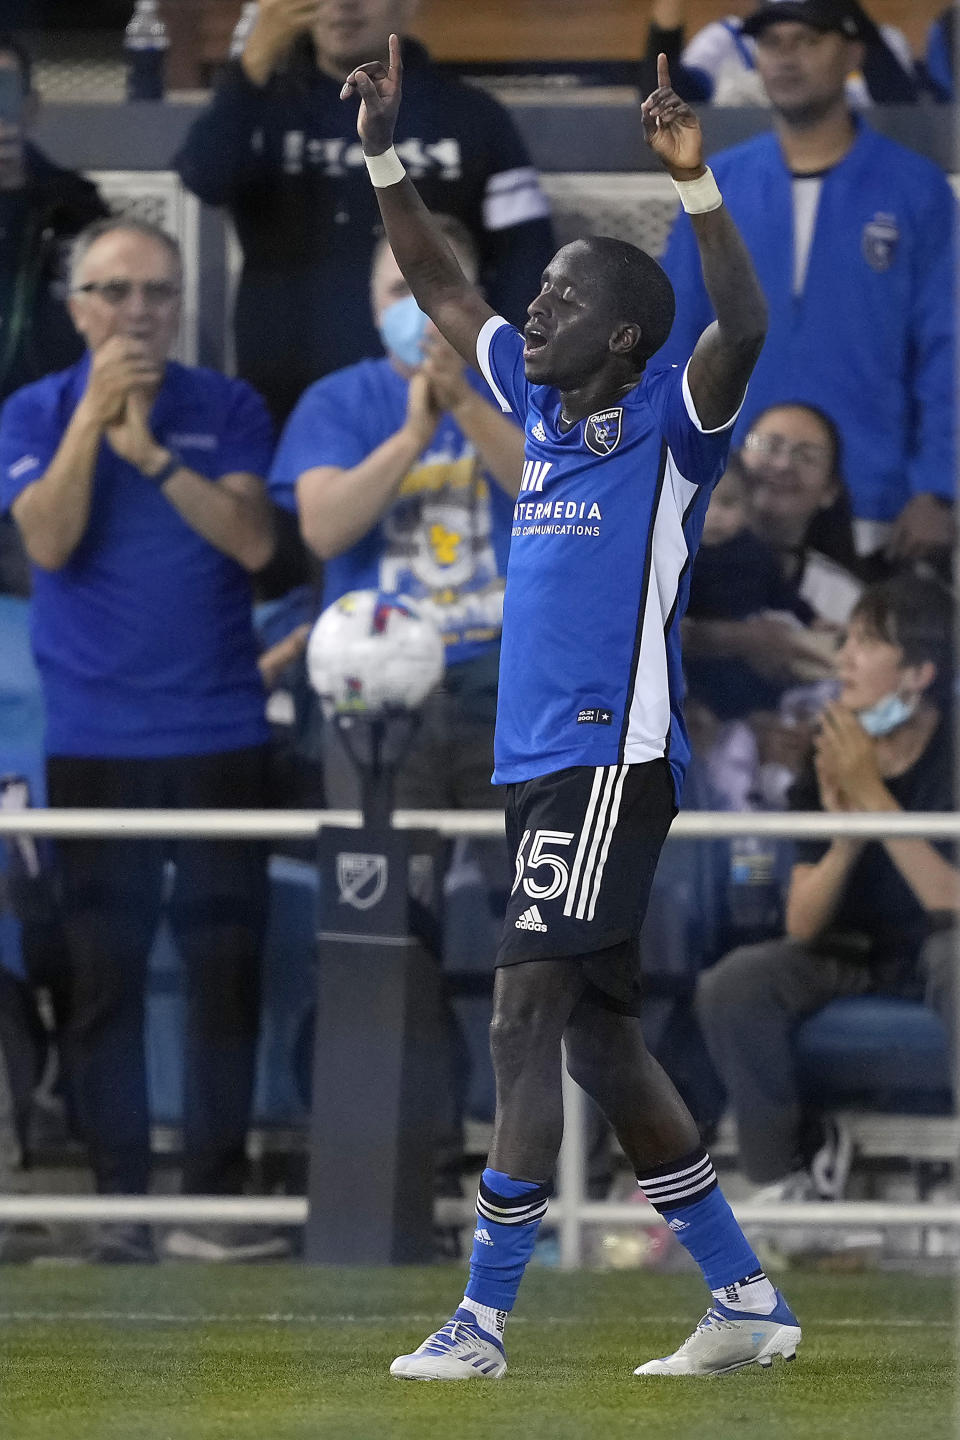 San Jose Earthquakes midfielder Jamiro Monteiro (35) points to the sky after scoring a goal against the Portland Timbers during the first half of an MLS soccer match in San Jose, Calif., Wednesday, May 18, 2022. (AP Photo/Tony Avelar)